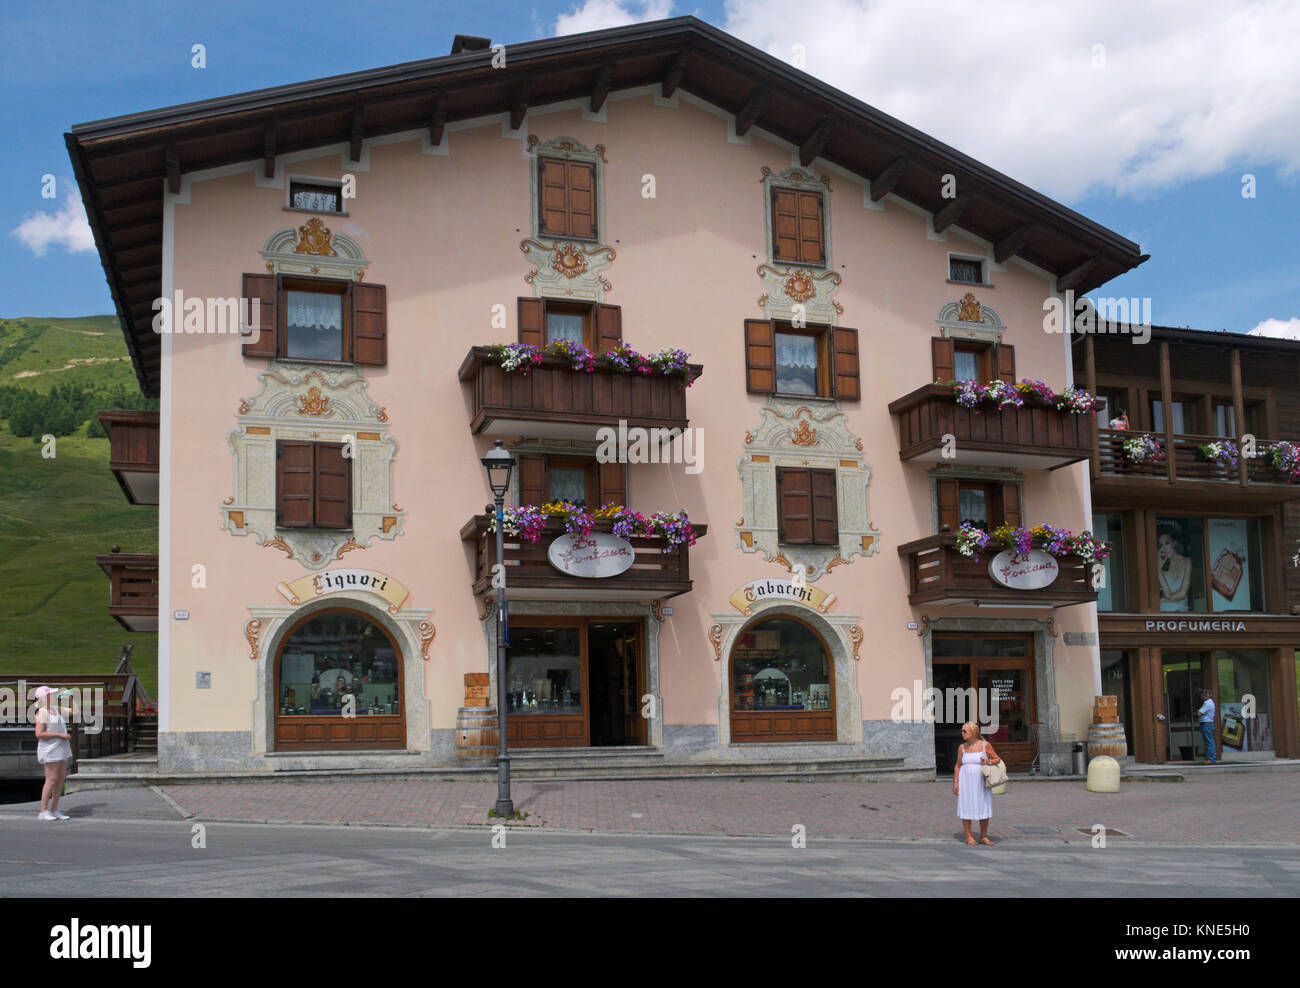 house and shop in Livigno, Lombardy region, Italy Stock Photo - Alamy